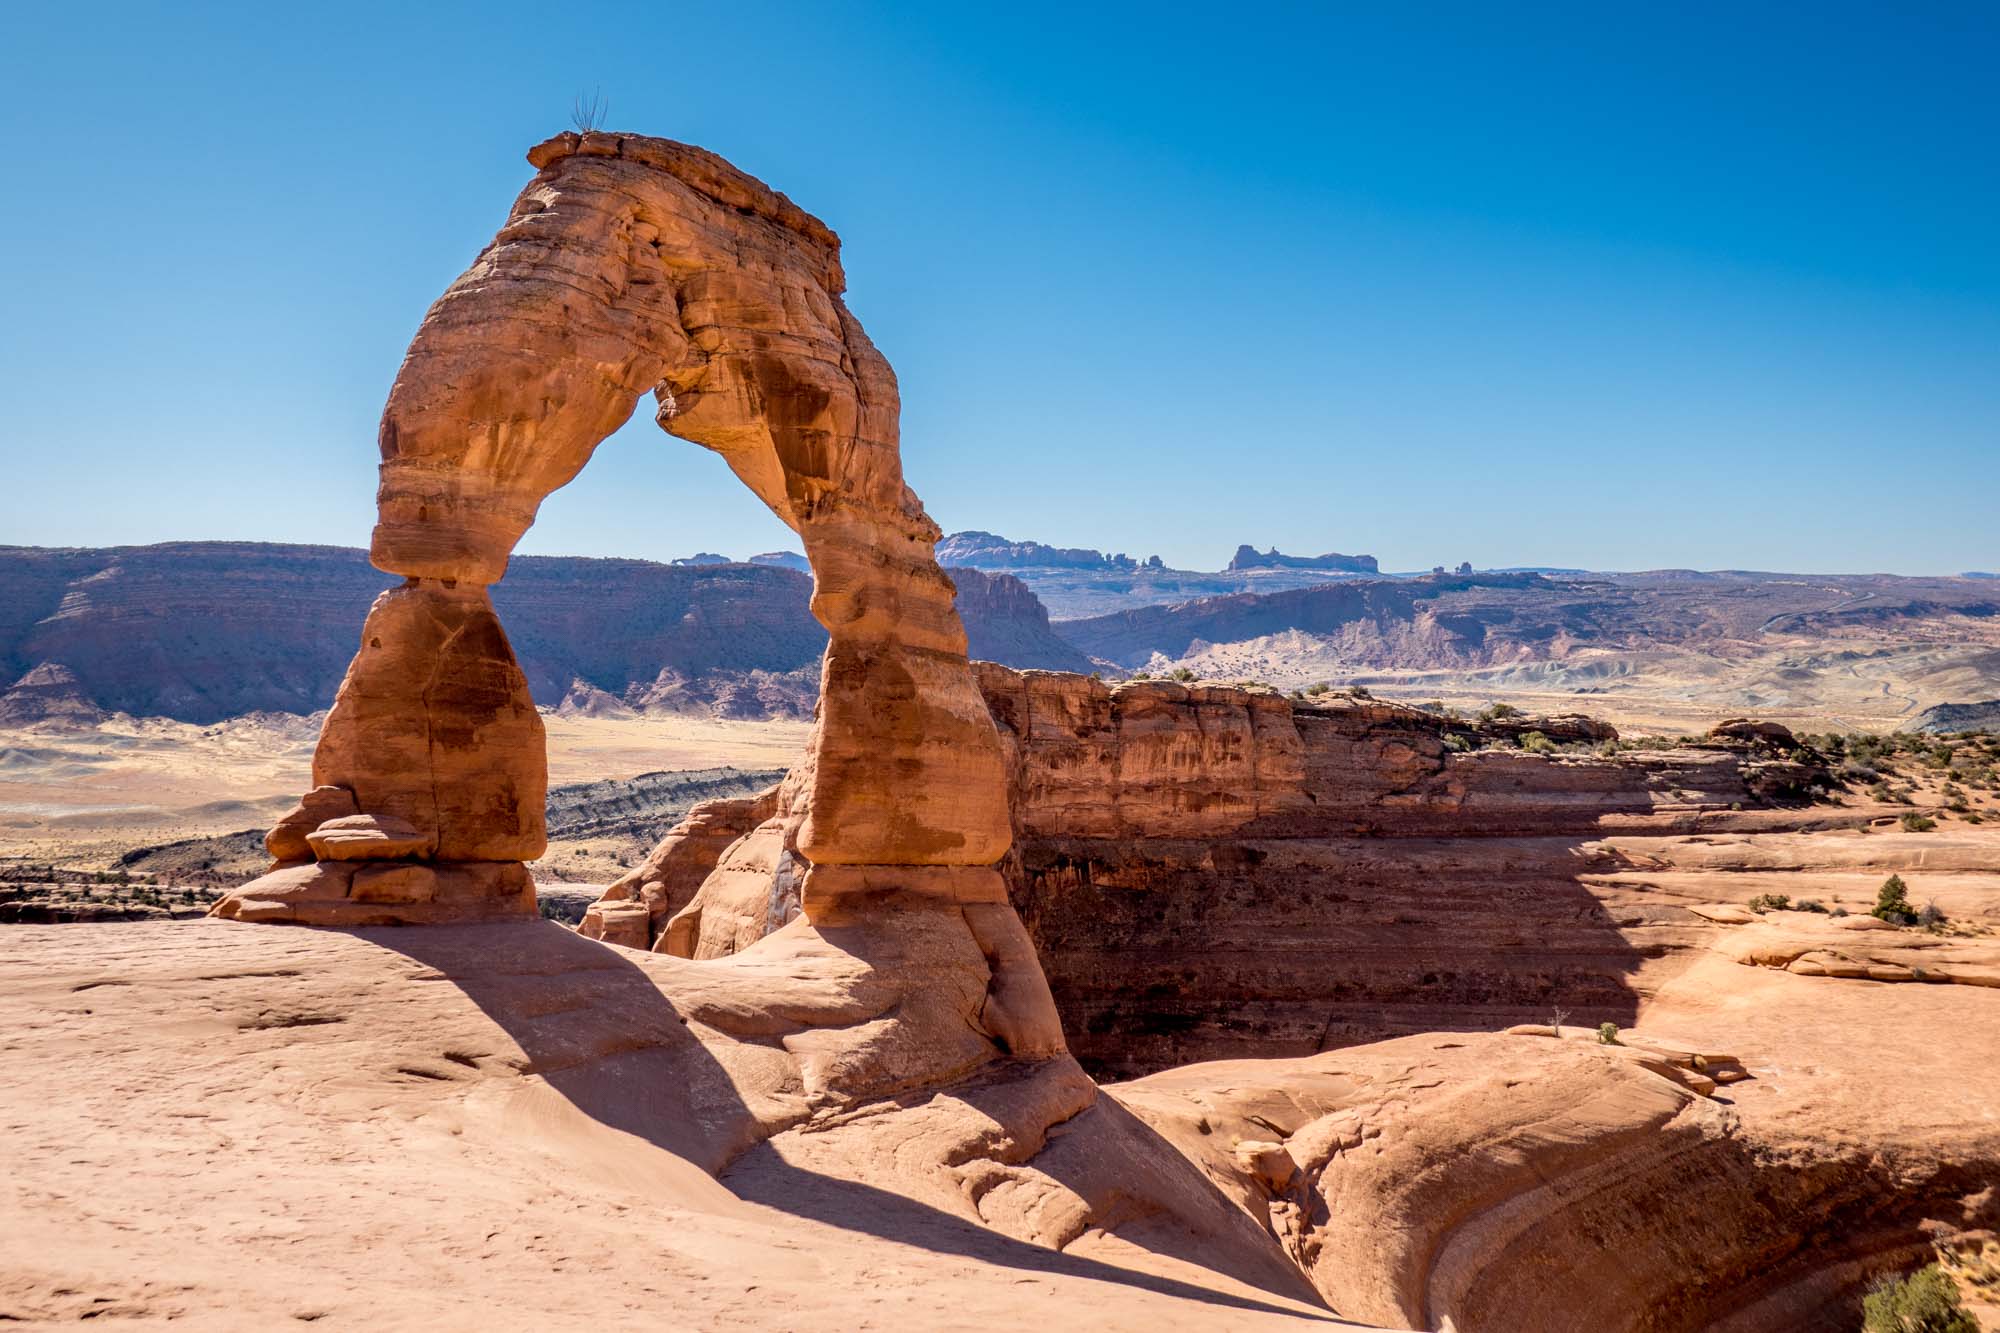 The Delicate Arch in Arches